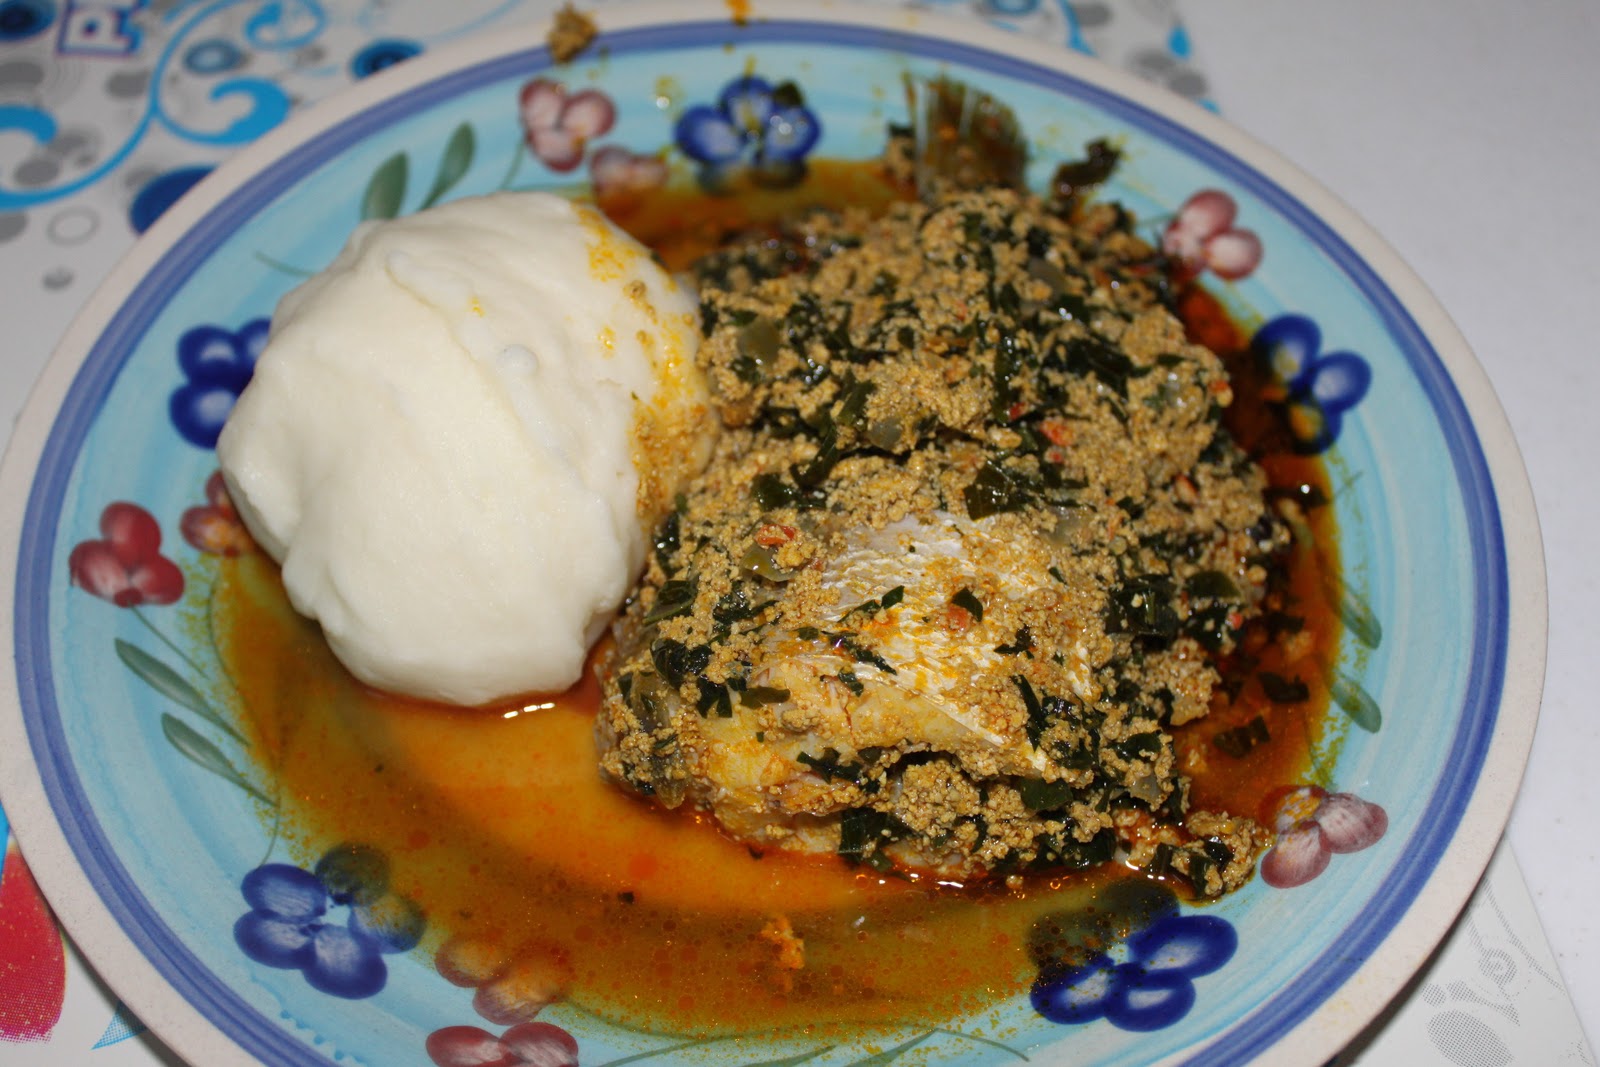 Today my house girl cook my favorite foods Pounded Yam and Egusi with Fish,